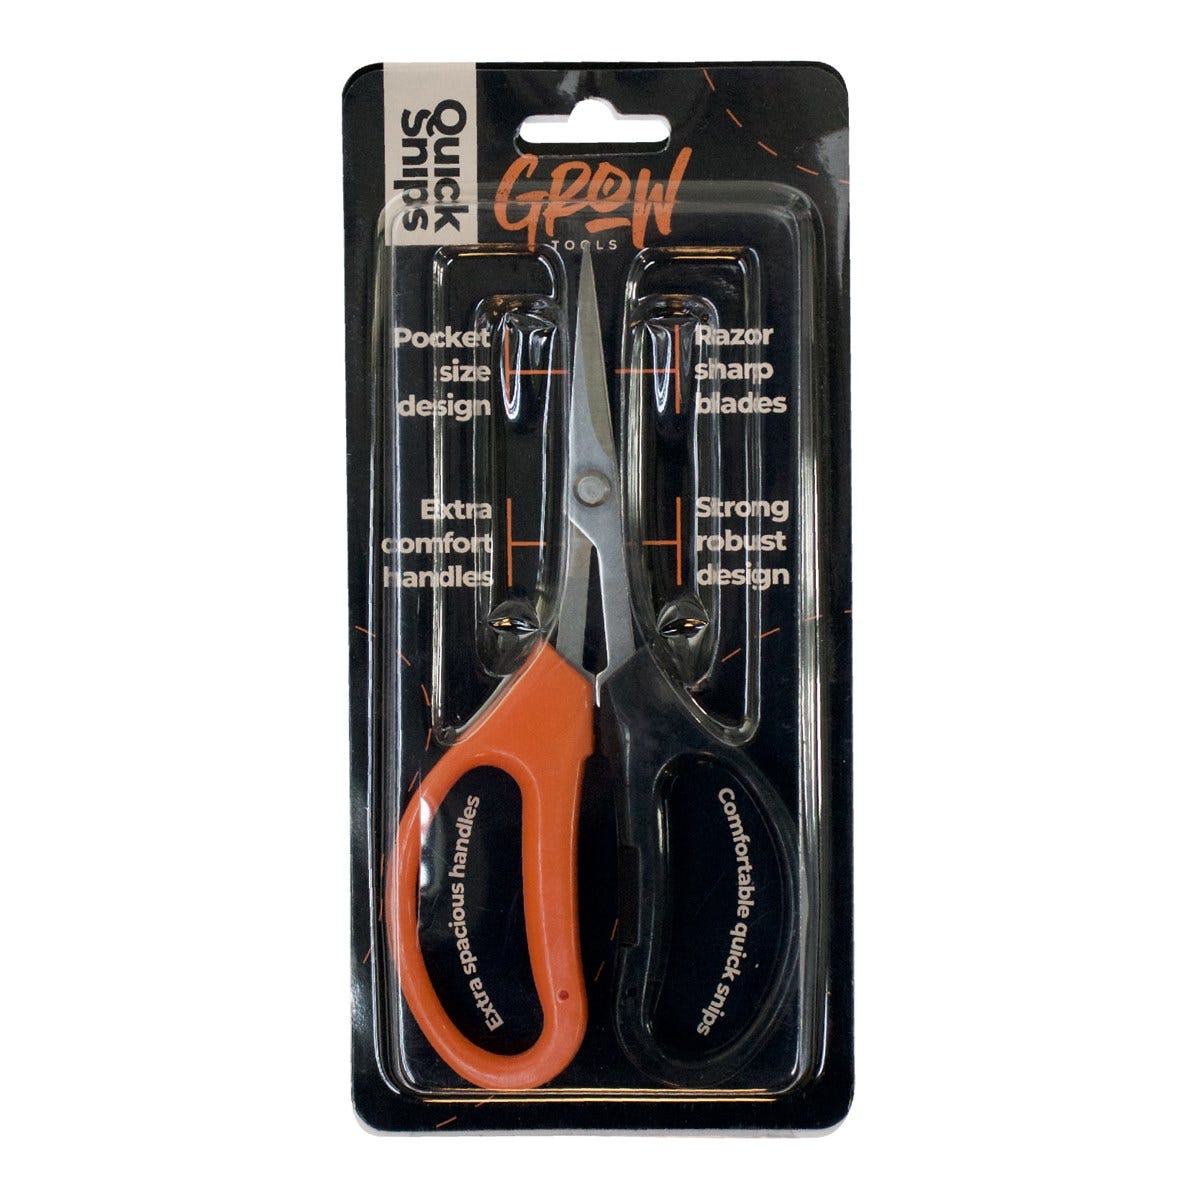 Grow Tools Quick Snips in Box